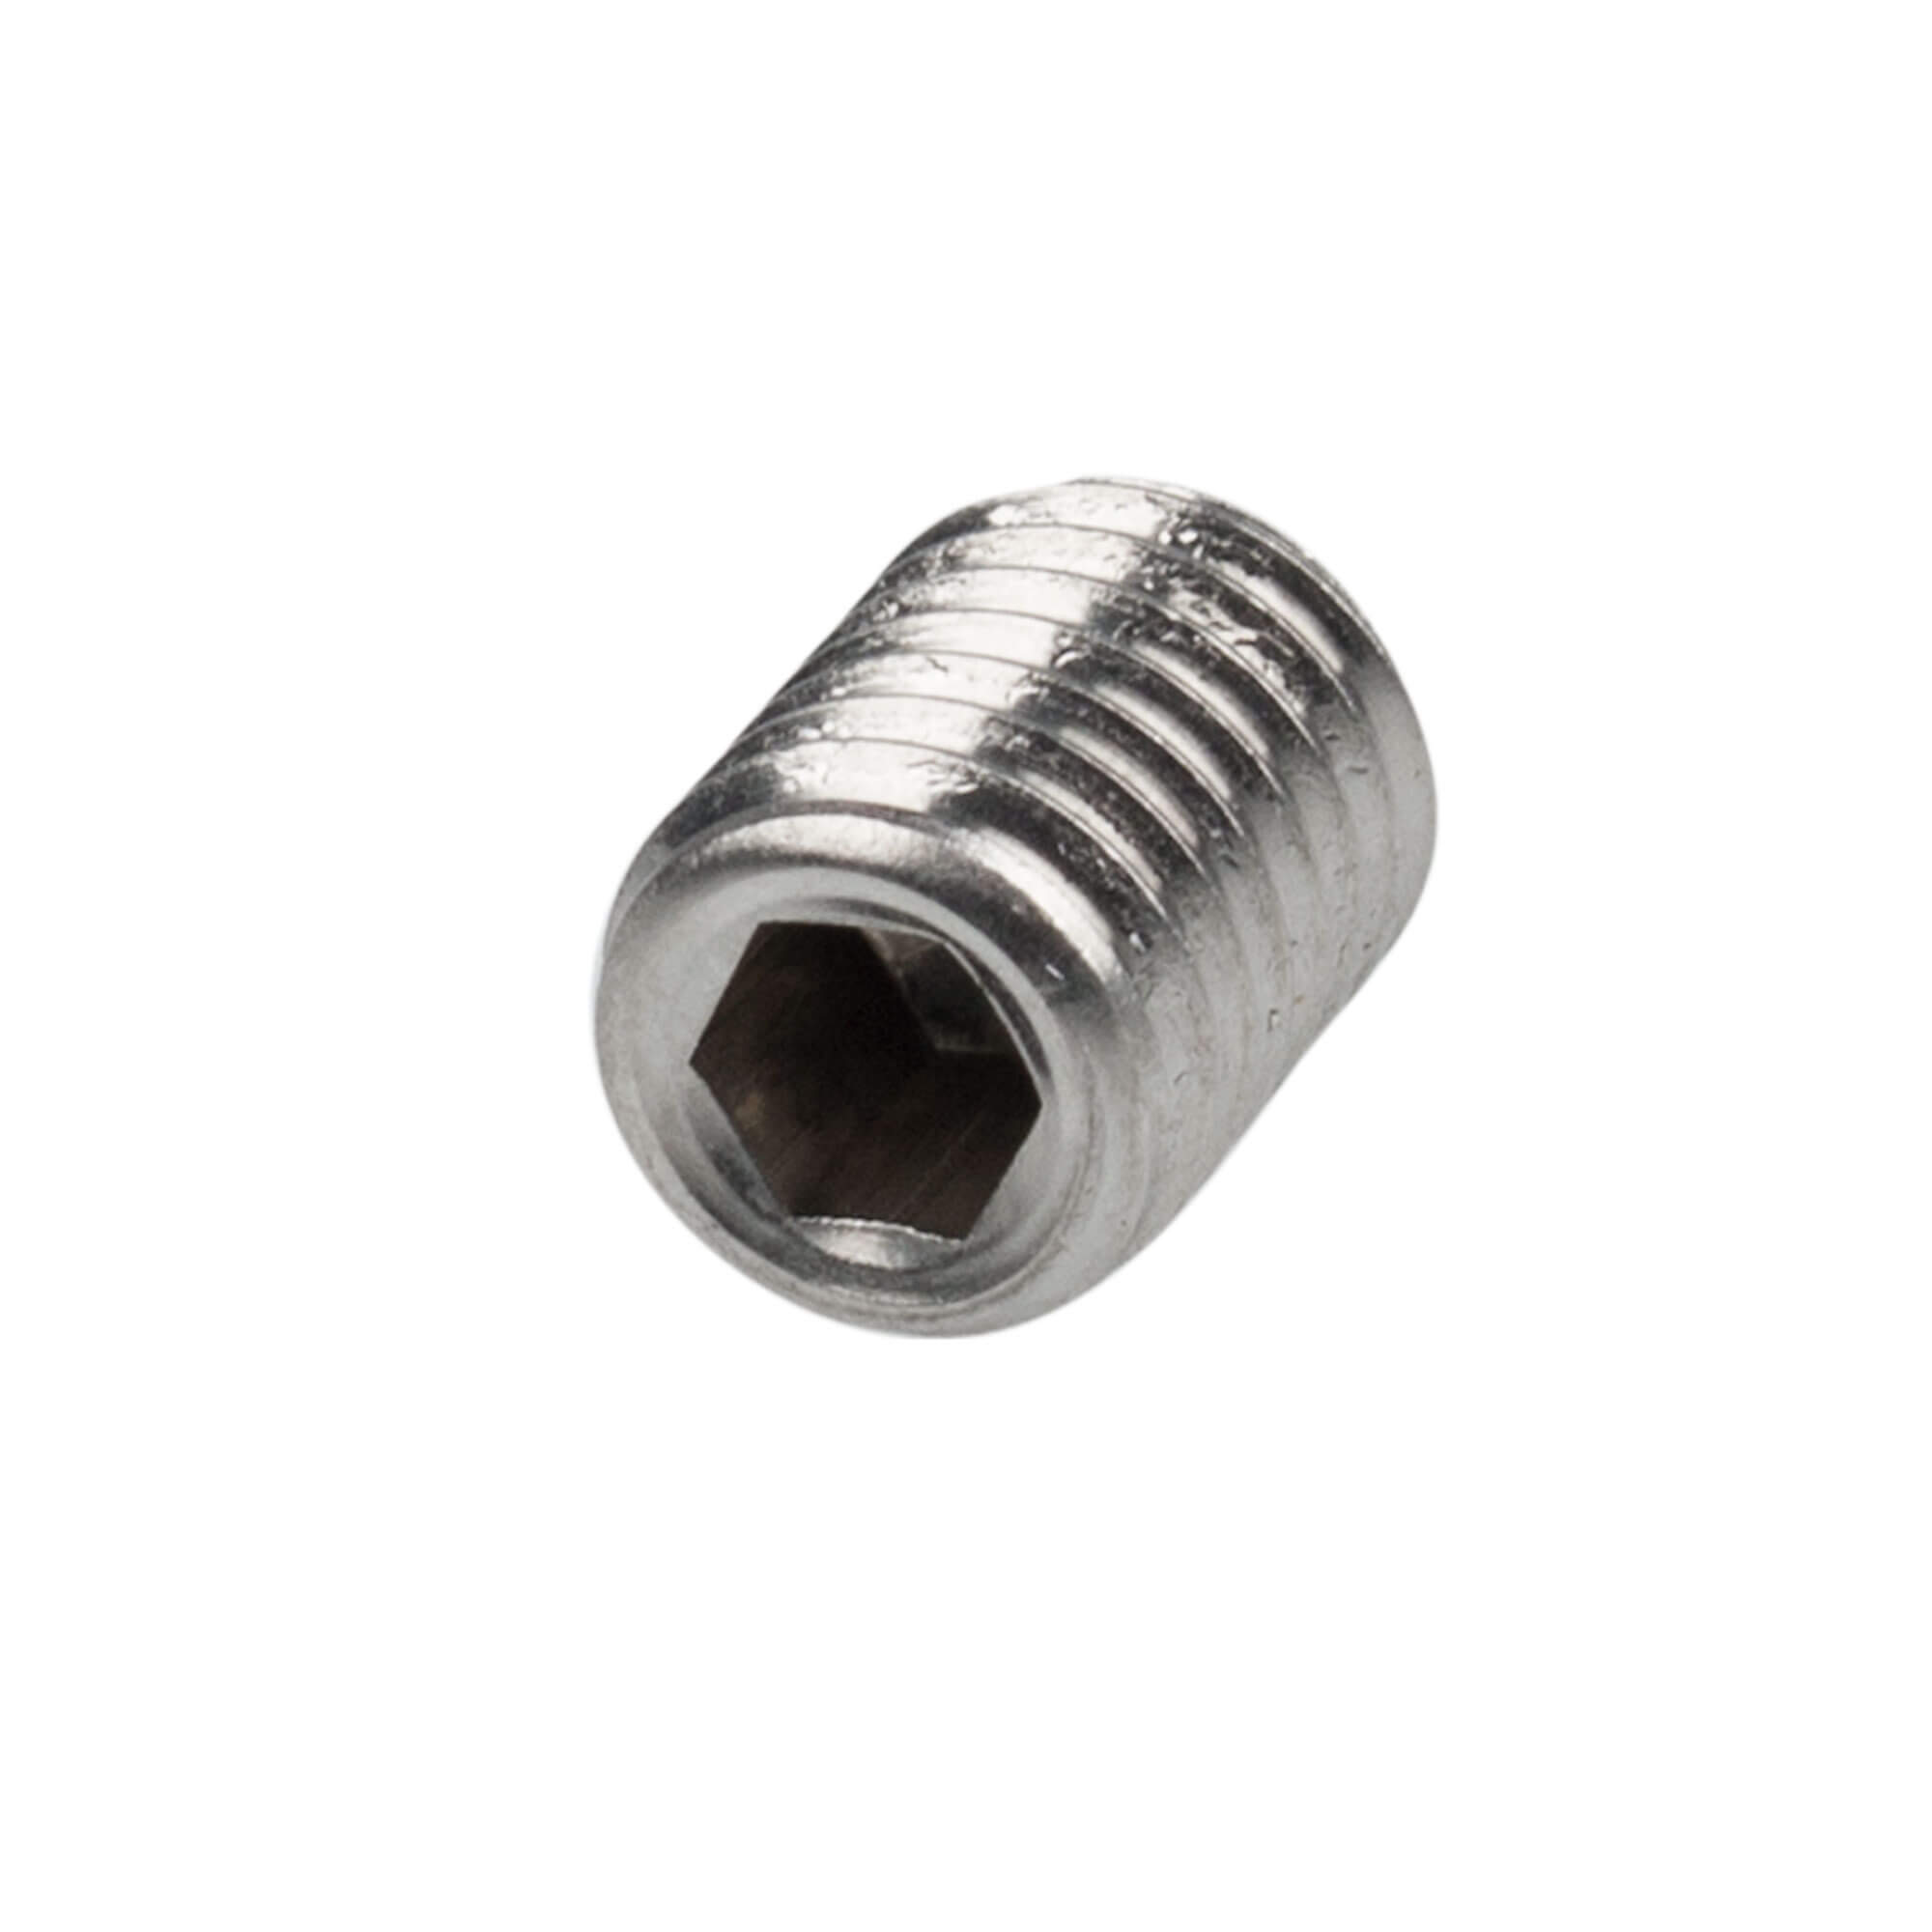 M10x14 setscrew - spare part for Cancan manual juicer